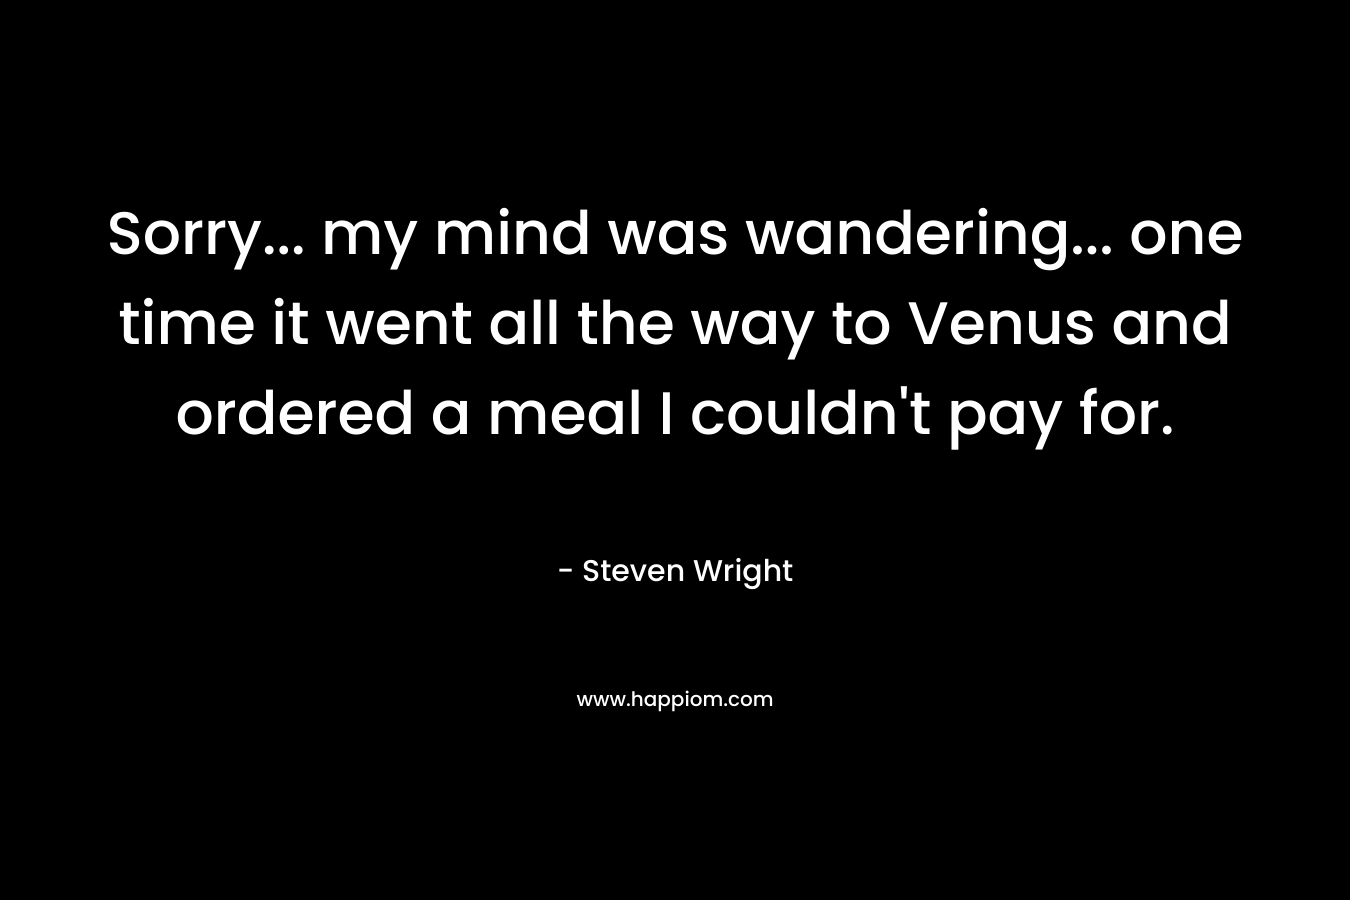 Sorry… my mind was wandering… one time it went all the way to Venus and ordered a meal I couldn’t pay for. – Steven Wright